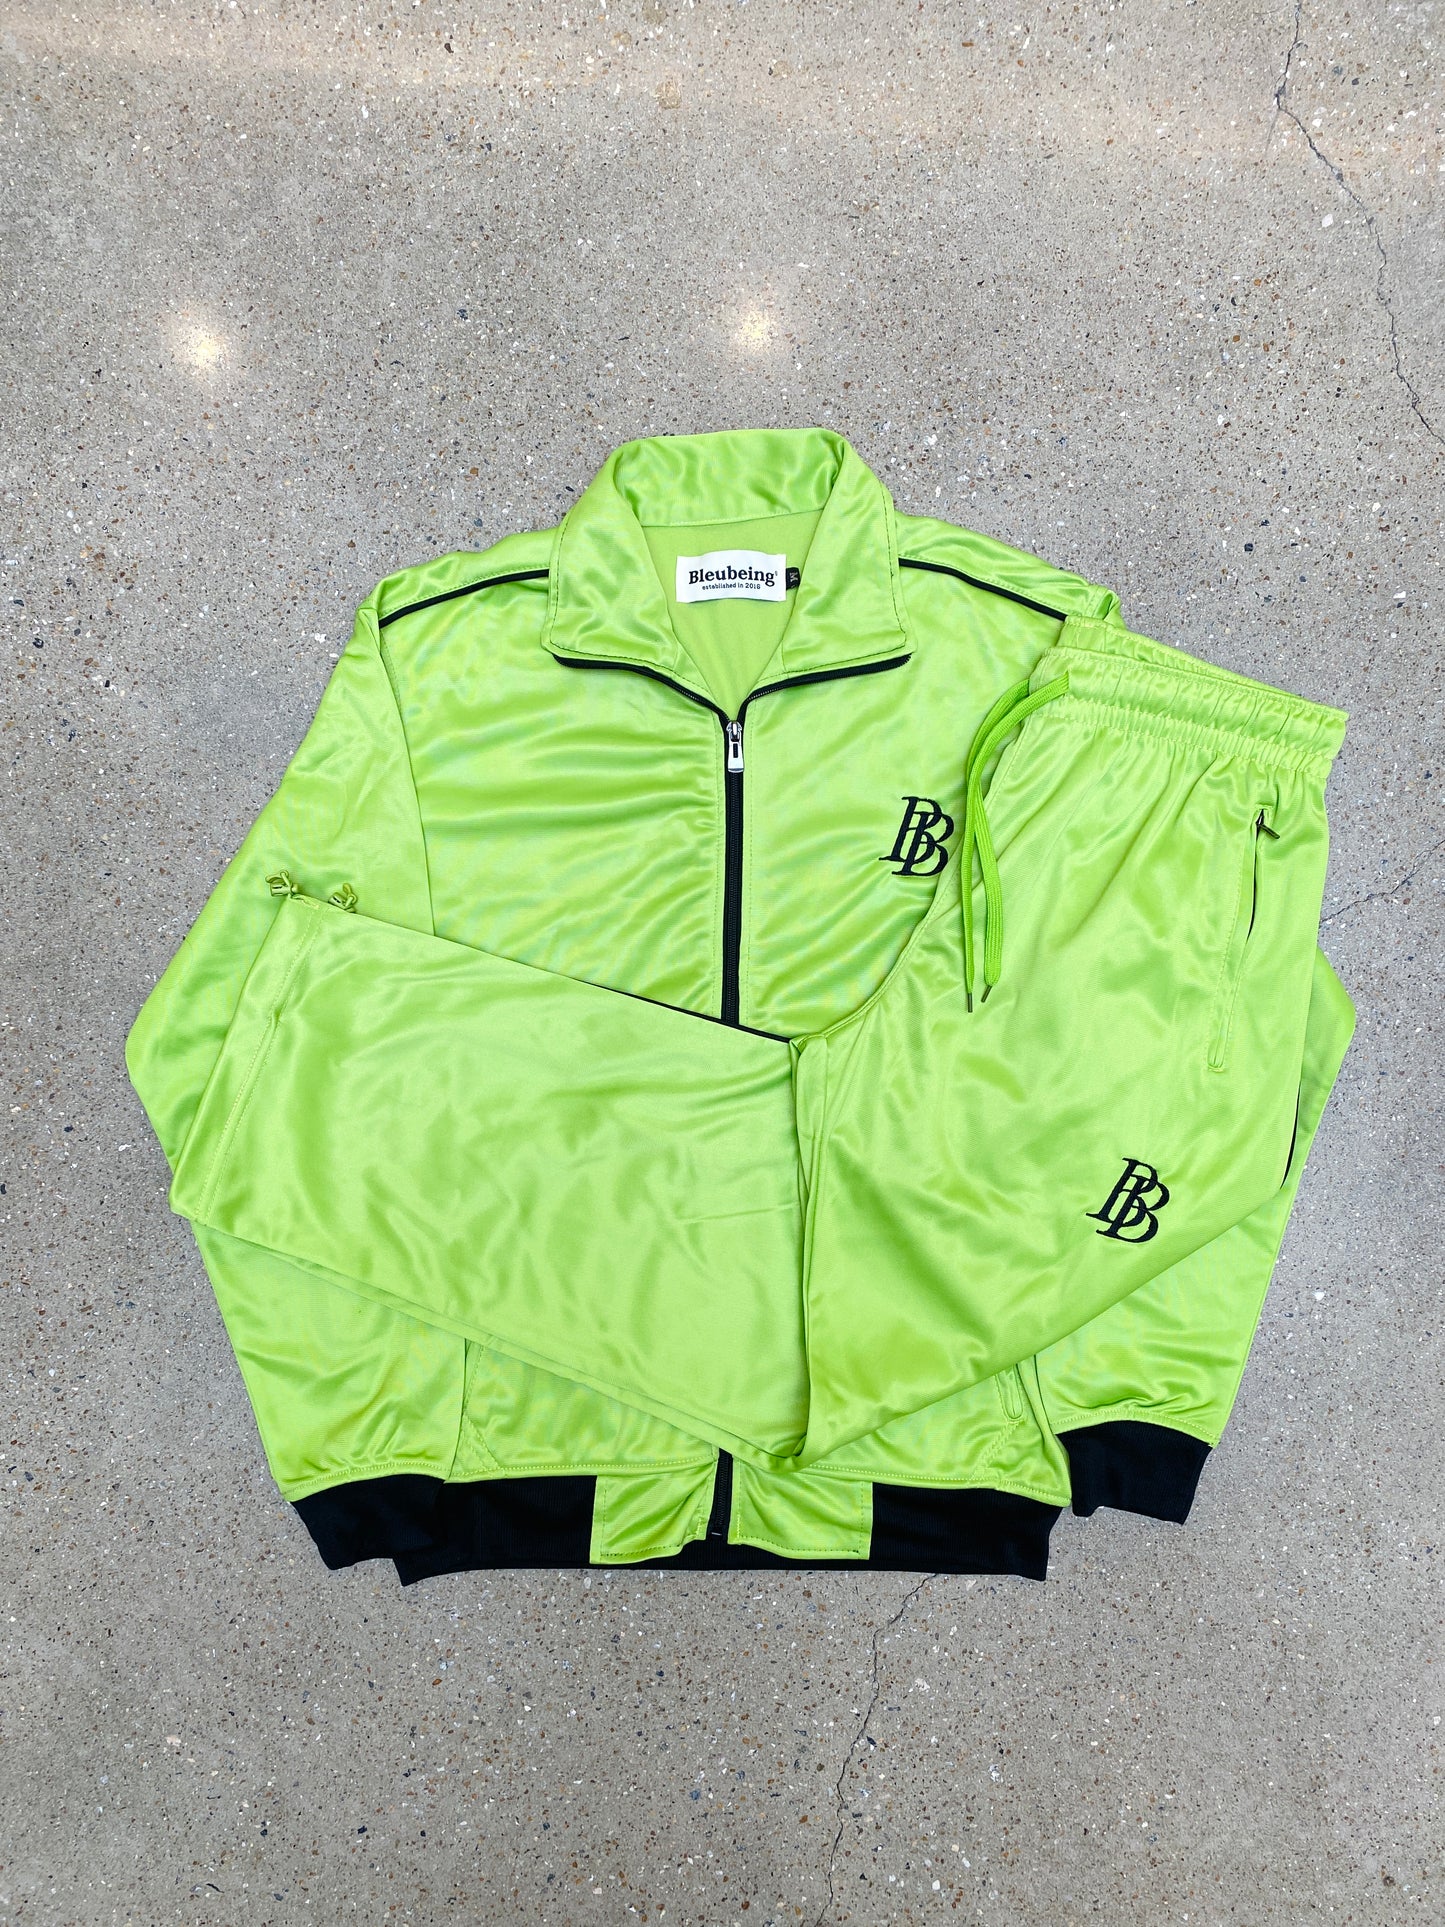 “BB” Lime Green tracksuit